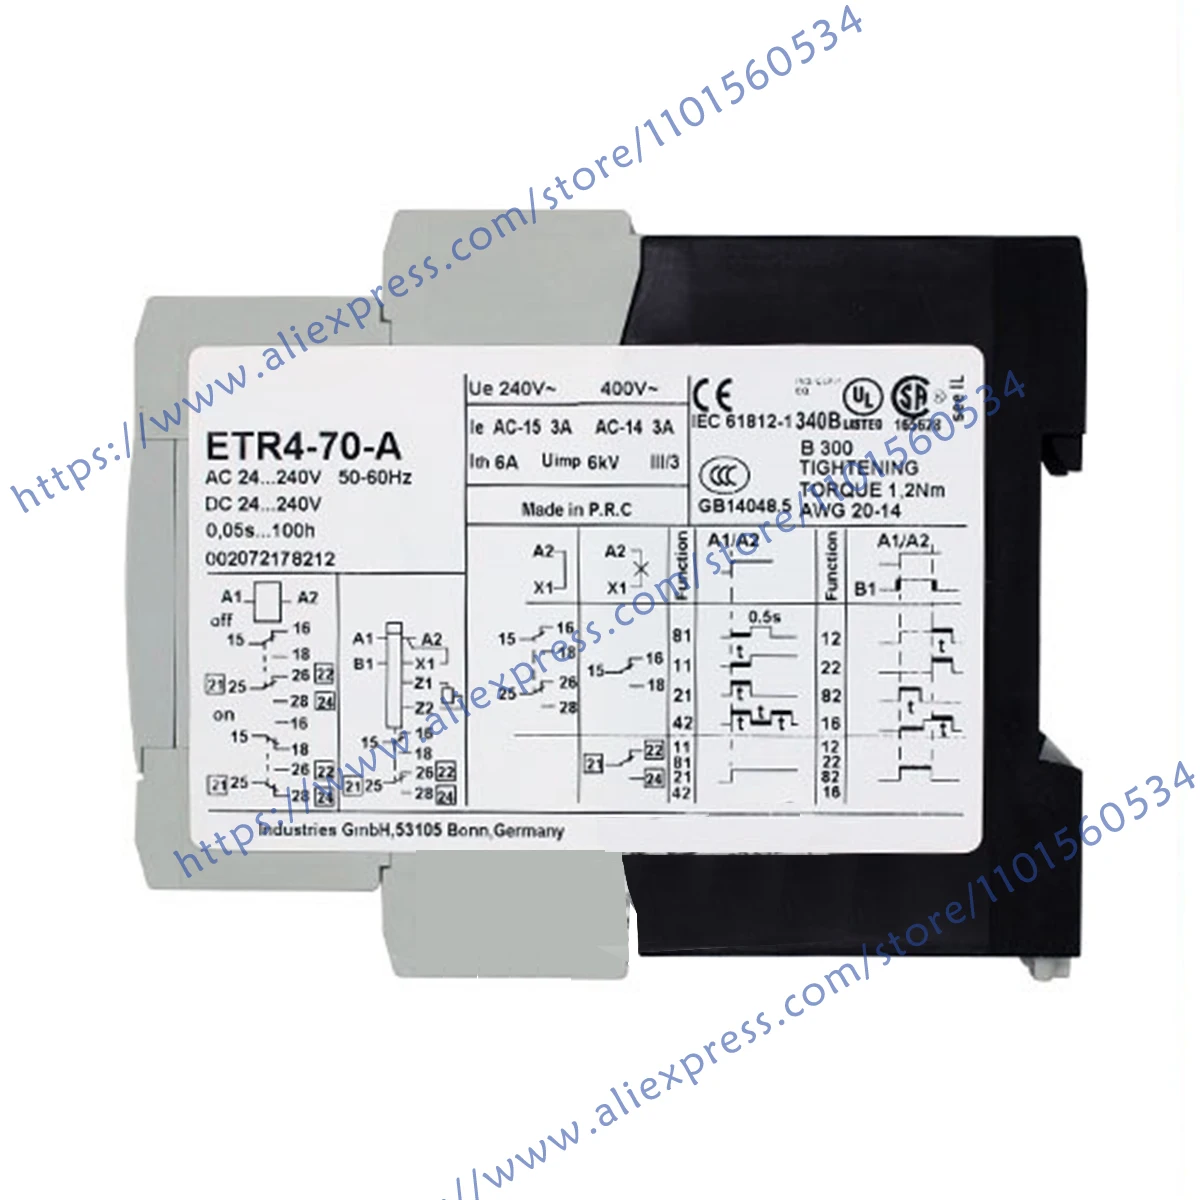 

ETR4-70-A Switching time relay ， Brand New Original Spot Photo, 1-Year Warranty